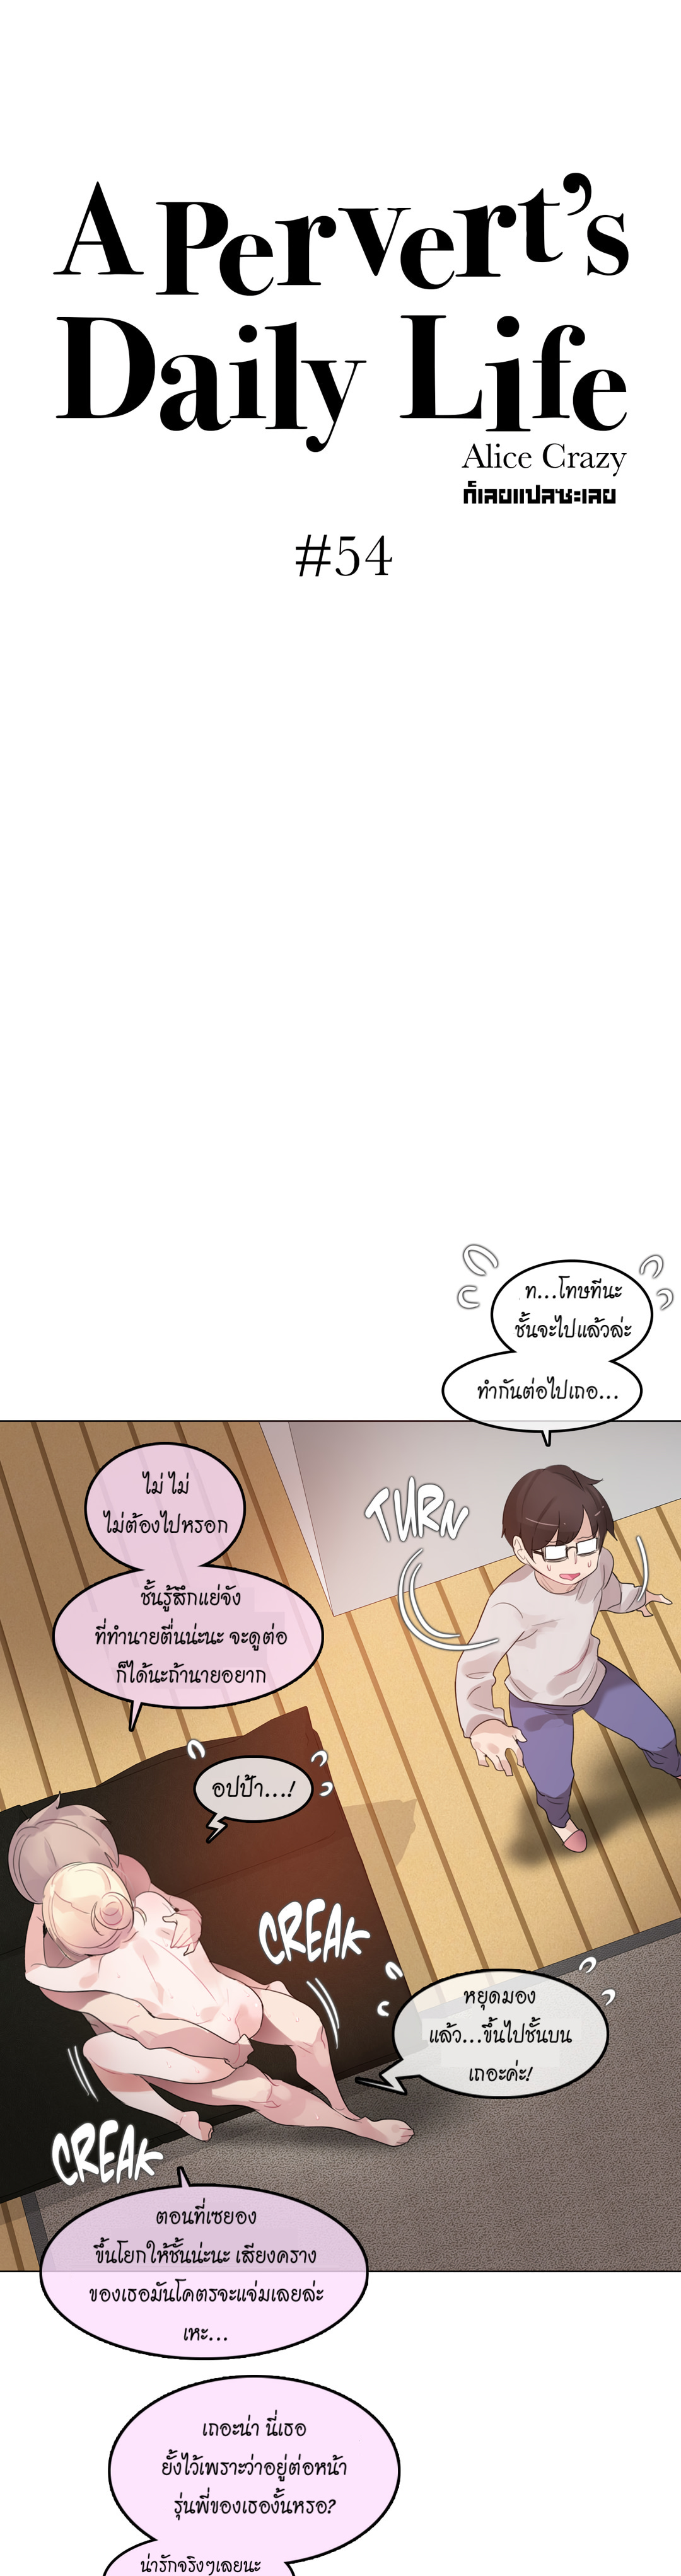 A Pervert’s Daily Life54 (3)